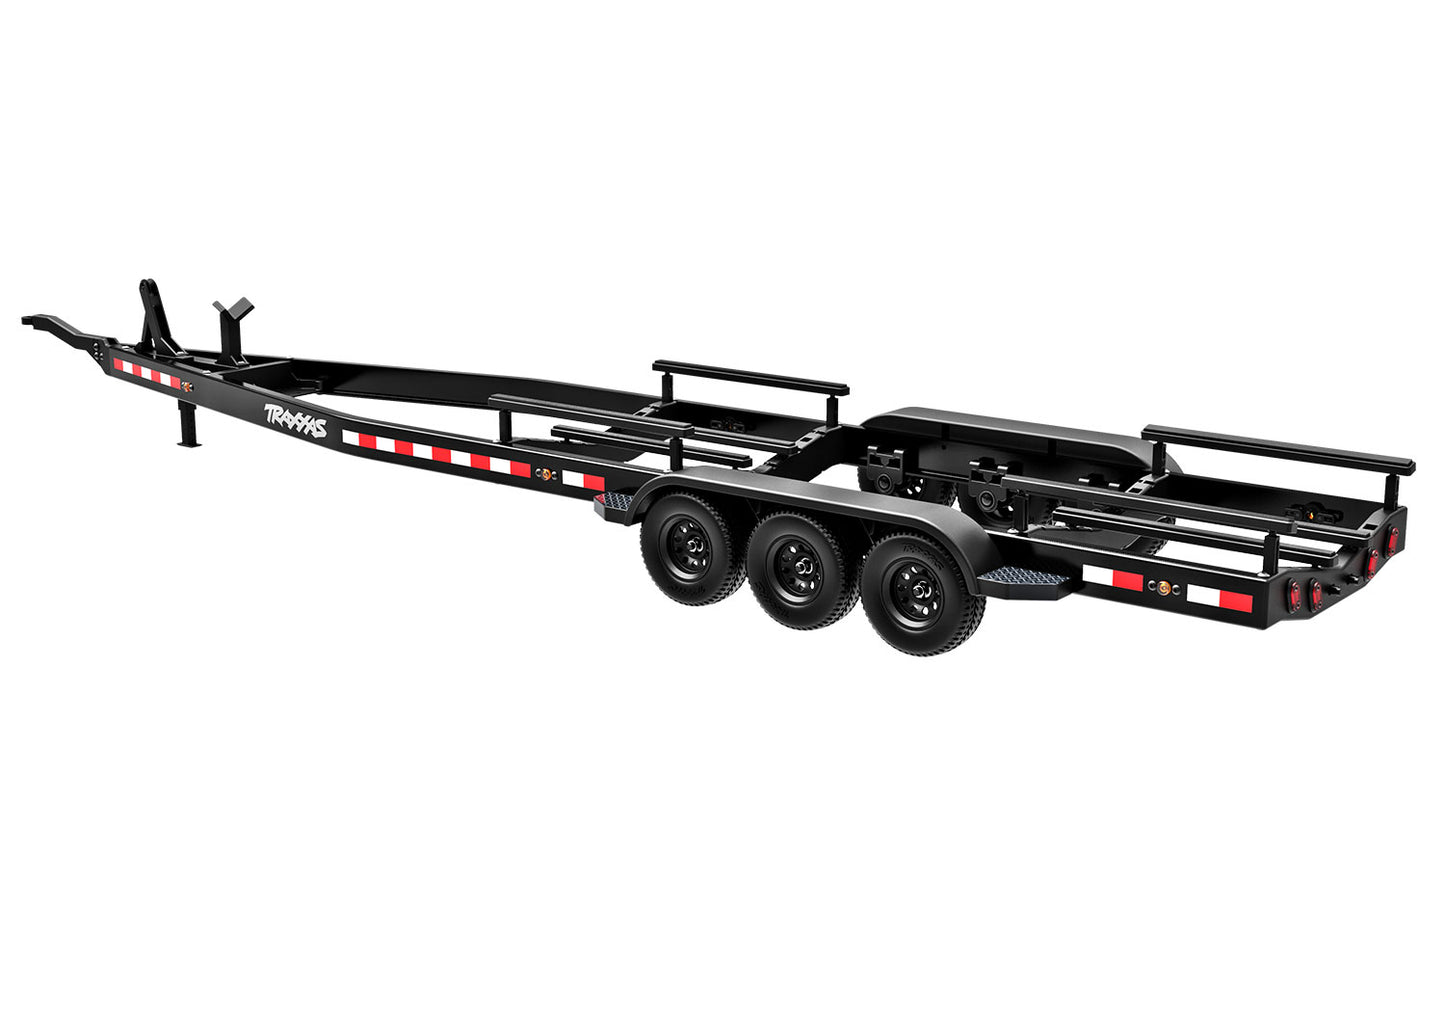 10350 Traxxas Boat Trailer, Spartan or DCB M41 (assembled with hitch)